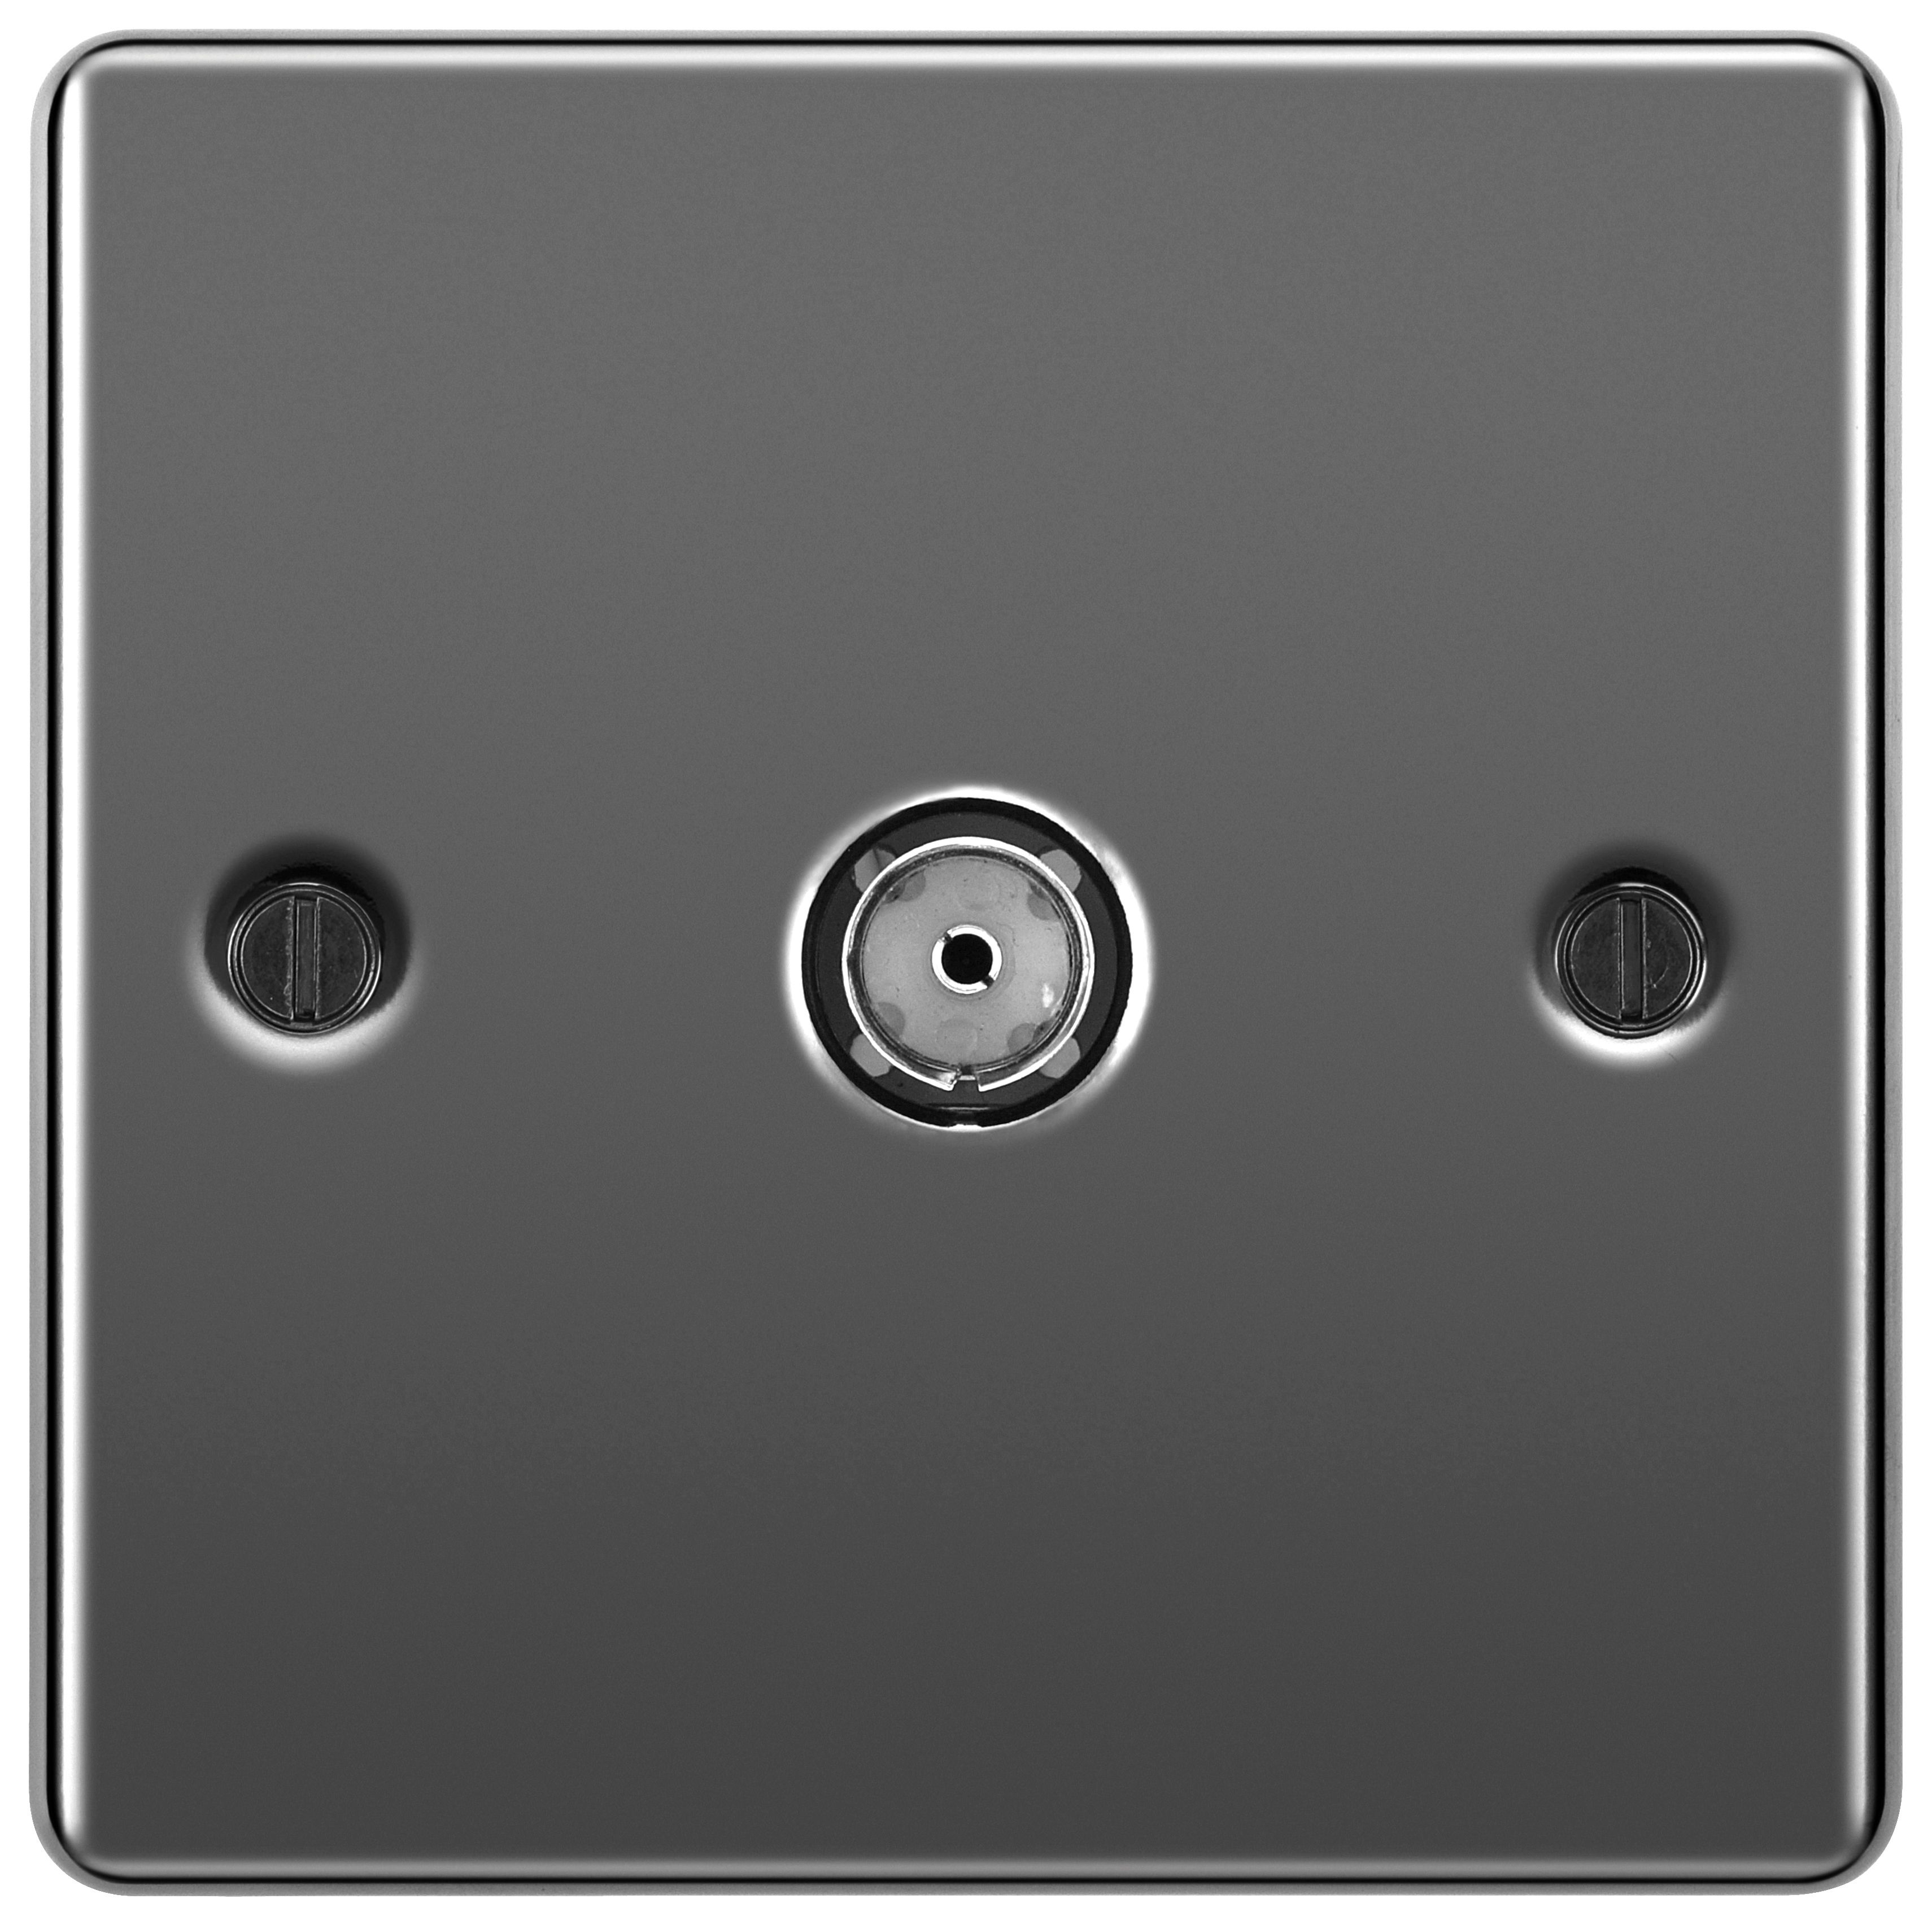 BG Screwed Raised Plate Single Socket For Tv Or Fm Co-Axial Aerial Connection - Black Nickel